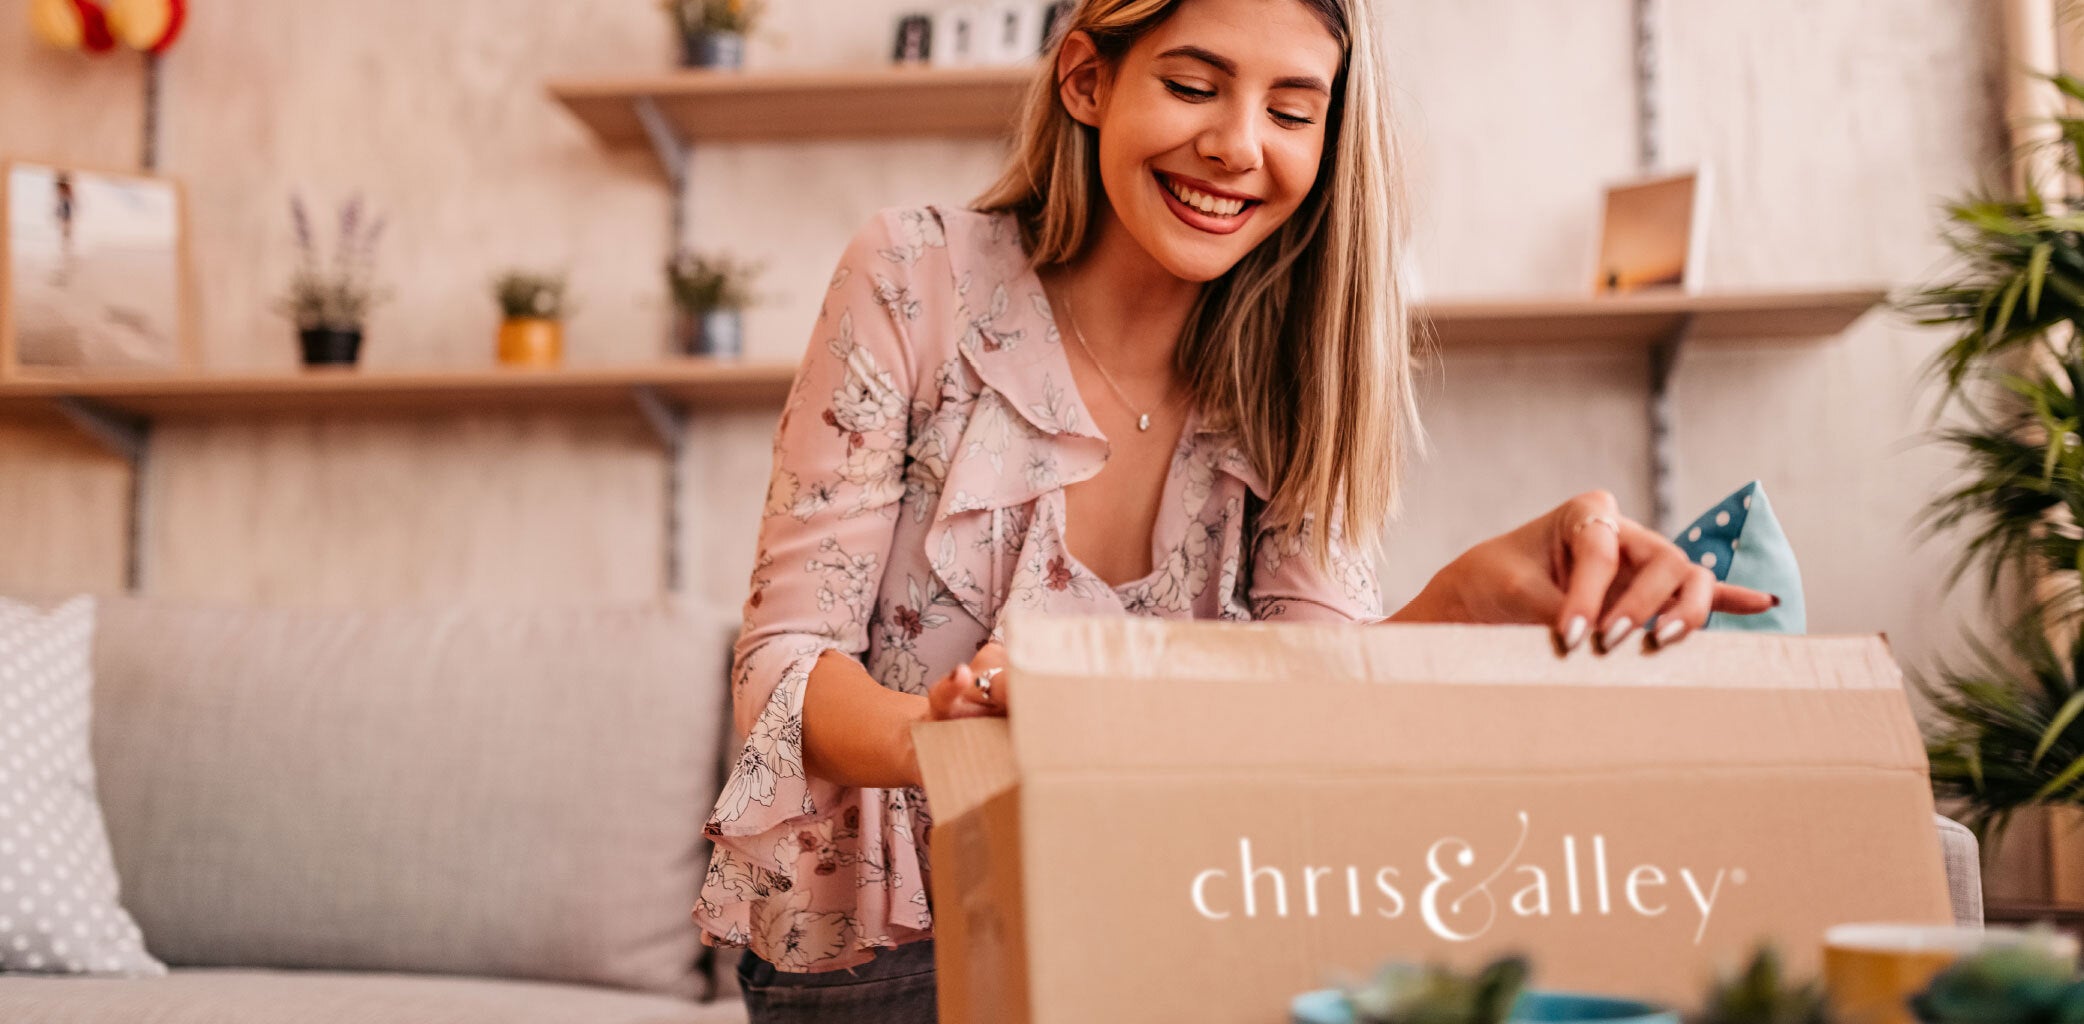 Lady unboxing chris and alley online package delivery